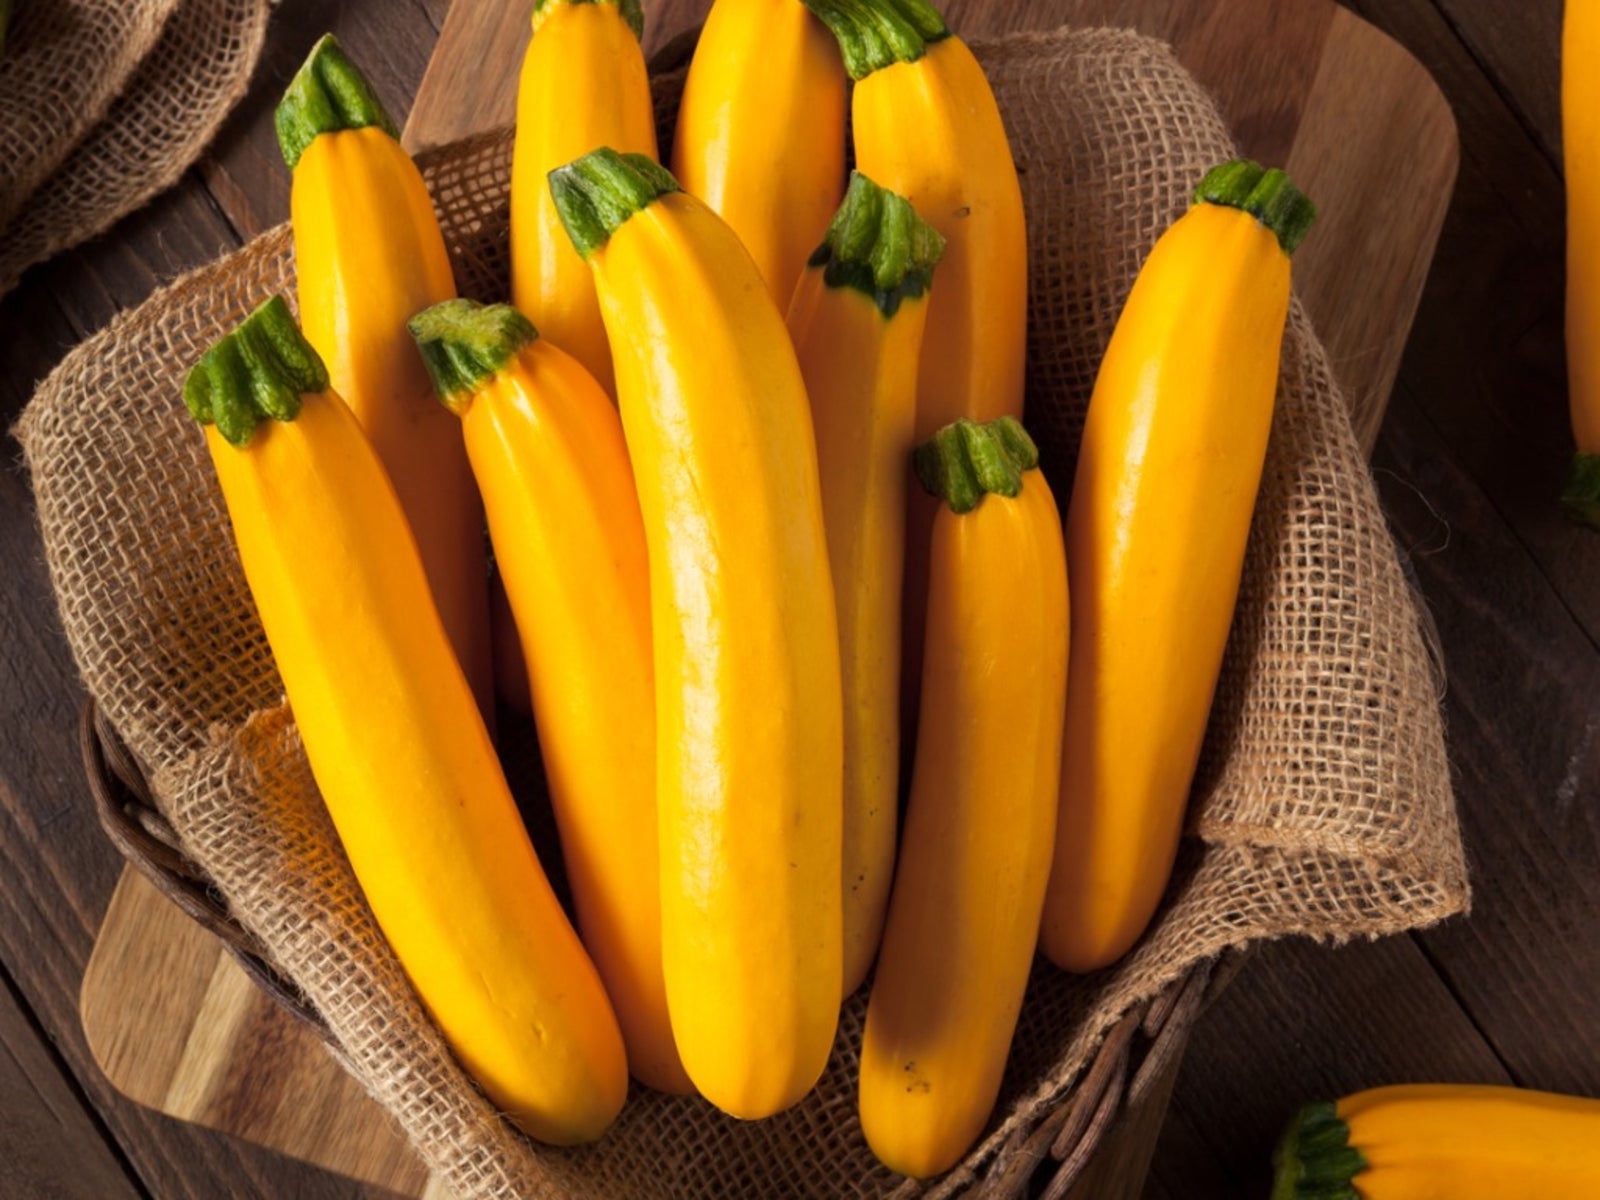 Golden Zucchini Information - Learn About Growing Golden Zucchini Plants